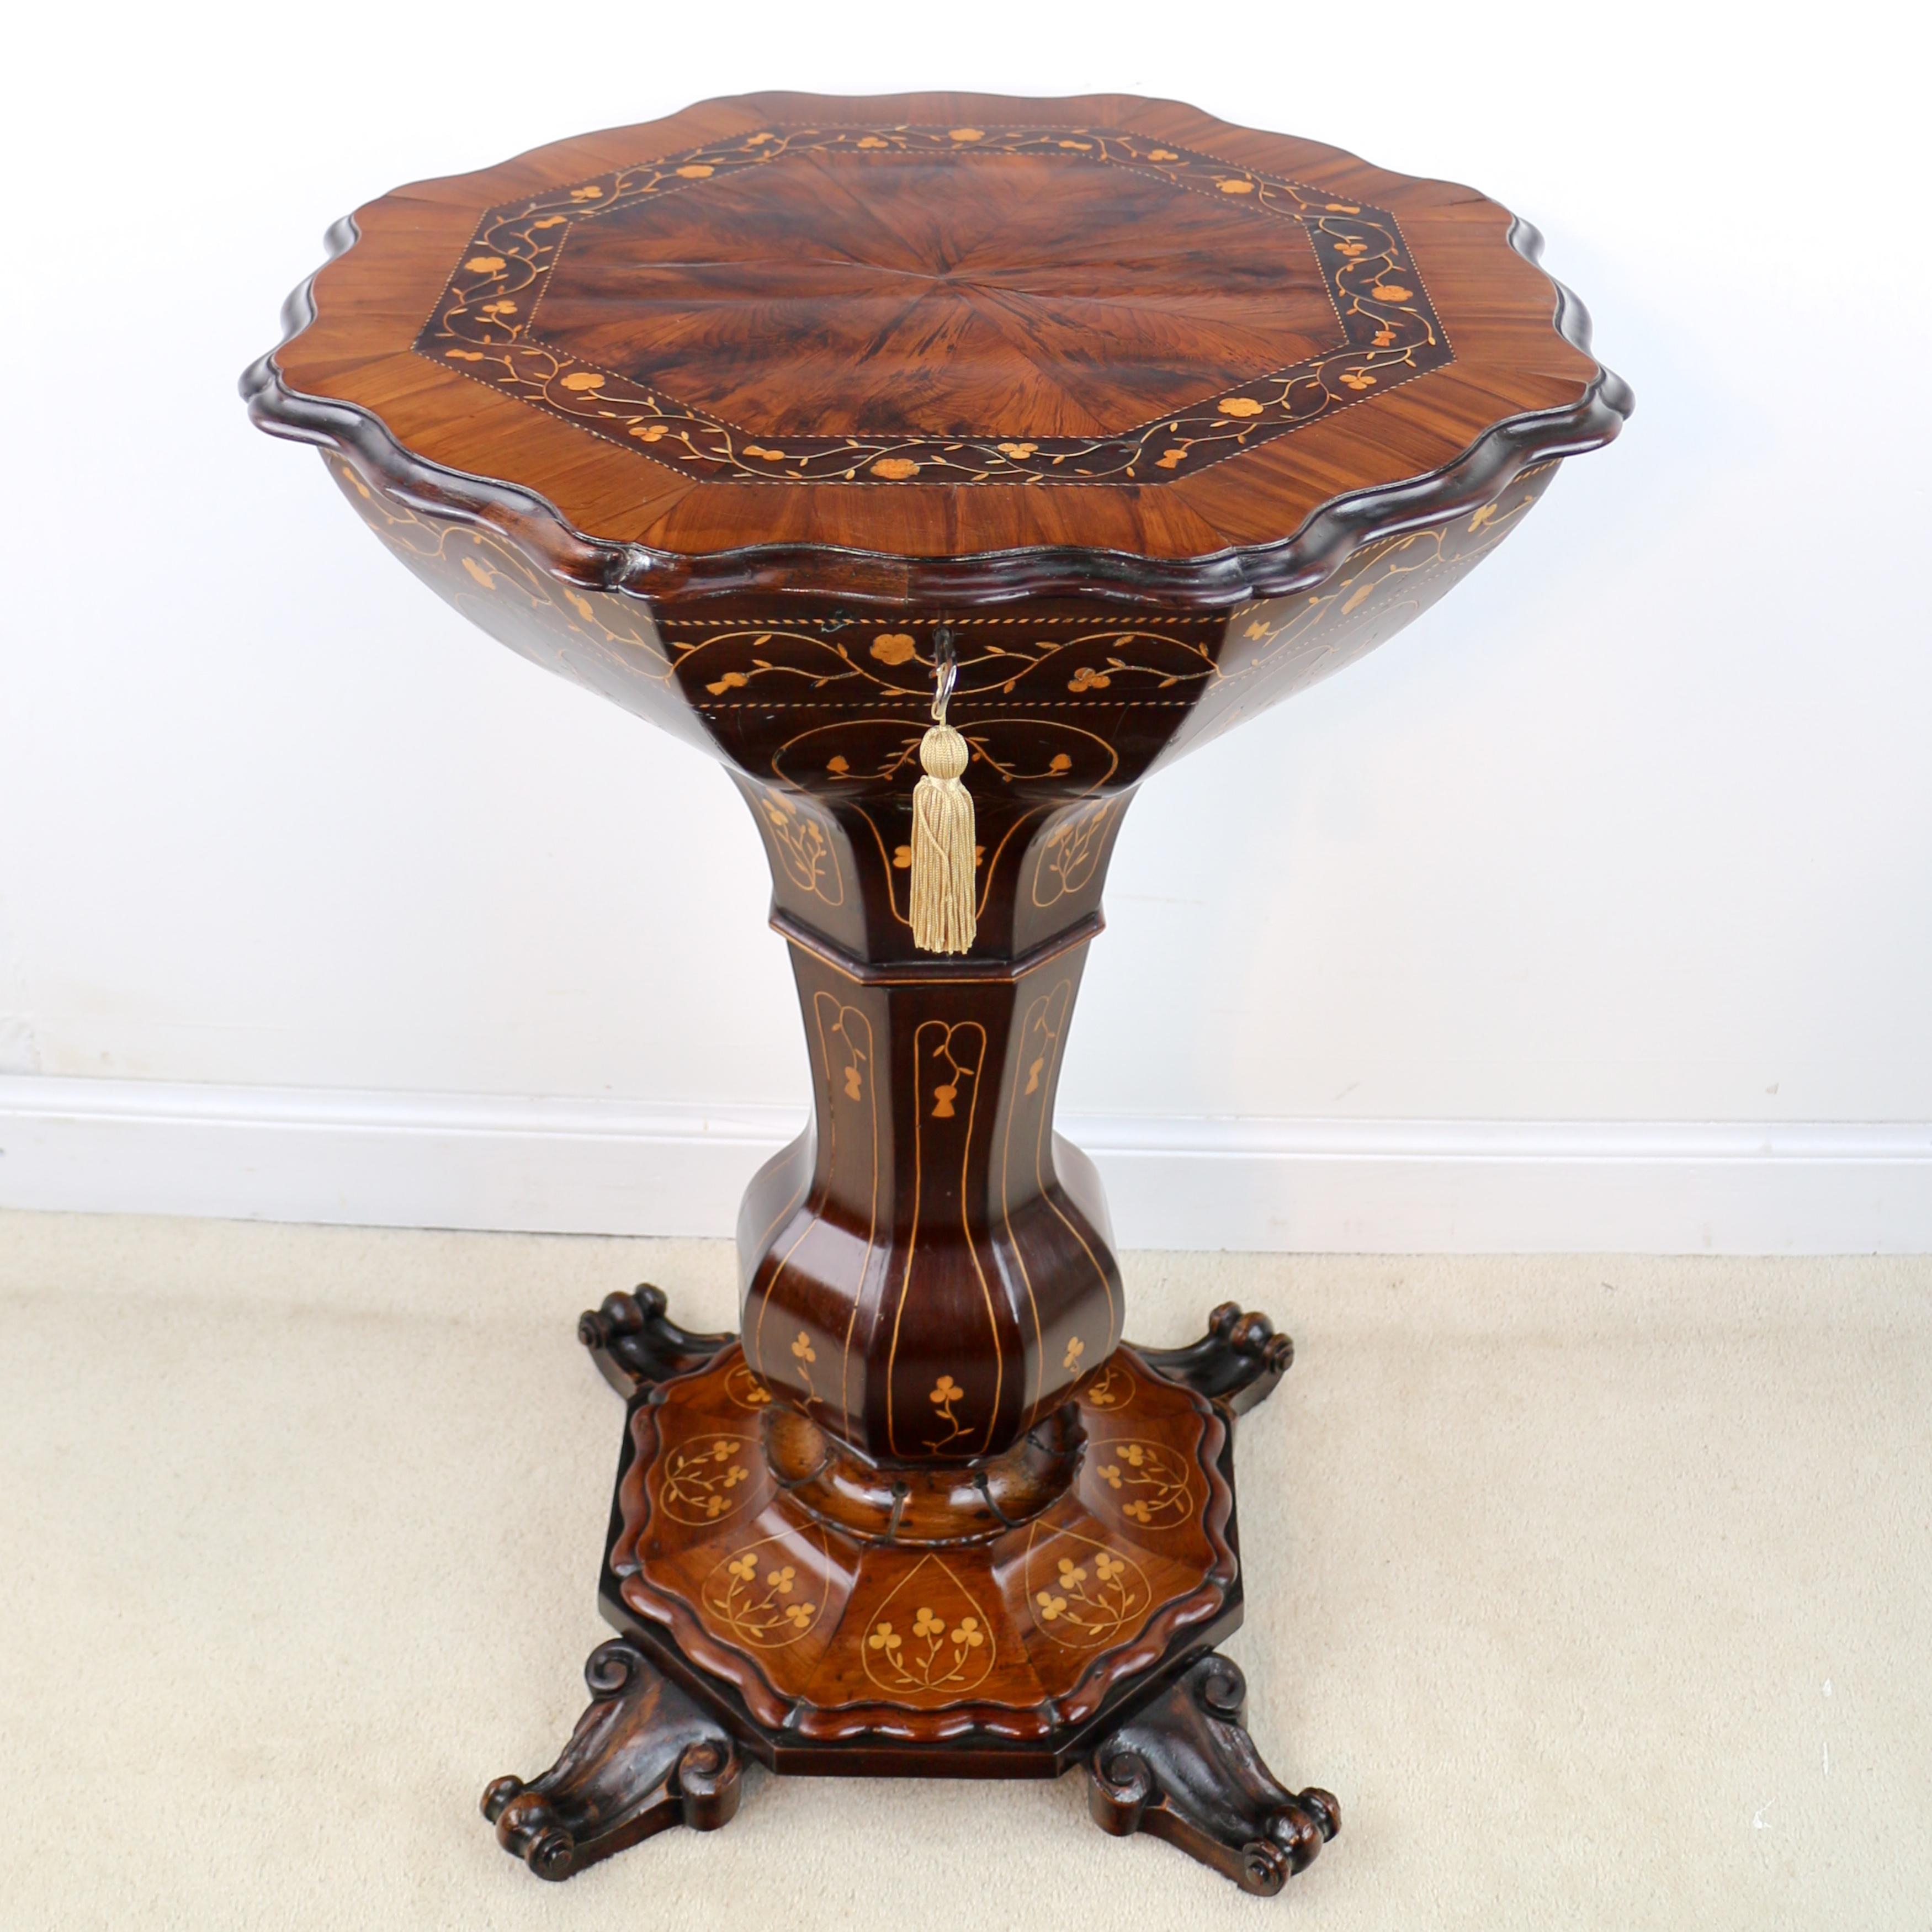 An exceptional quality Irish Killarney ware arbutus work table inlaid throughout with shamrocks, thistles and roses. The shaped octagonal top with radial veneers and opening to reveal a removable sectioned and lidding sewing tray with paper lined